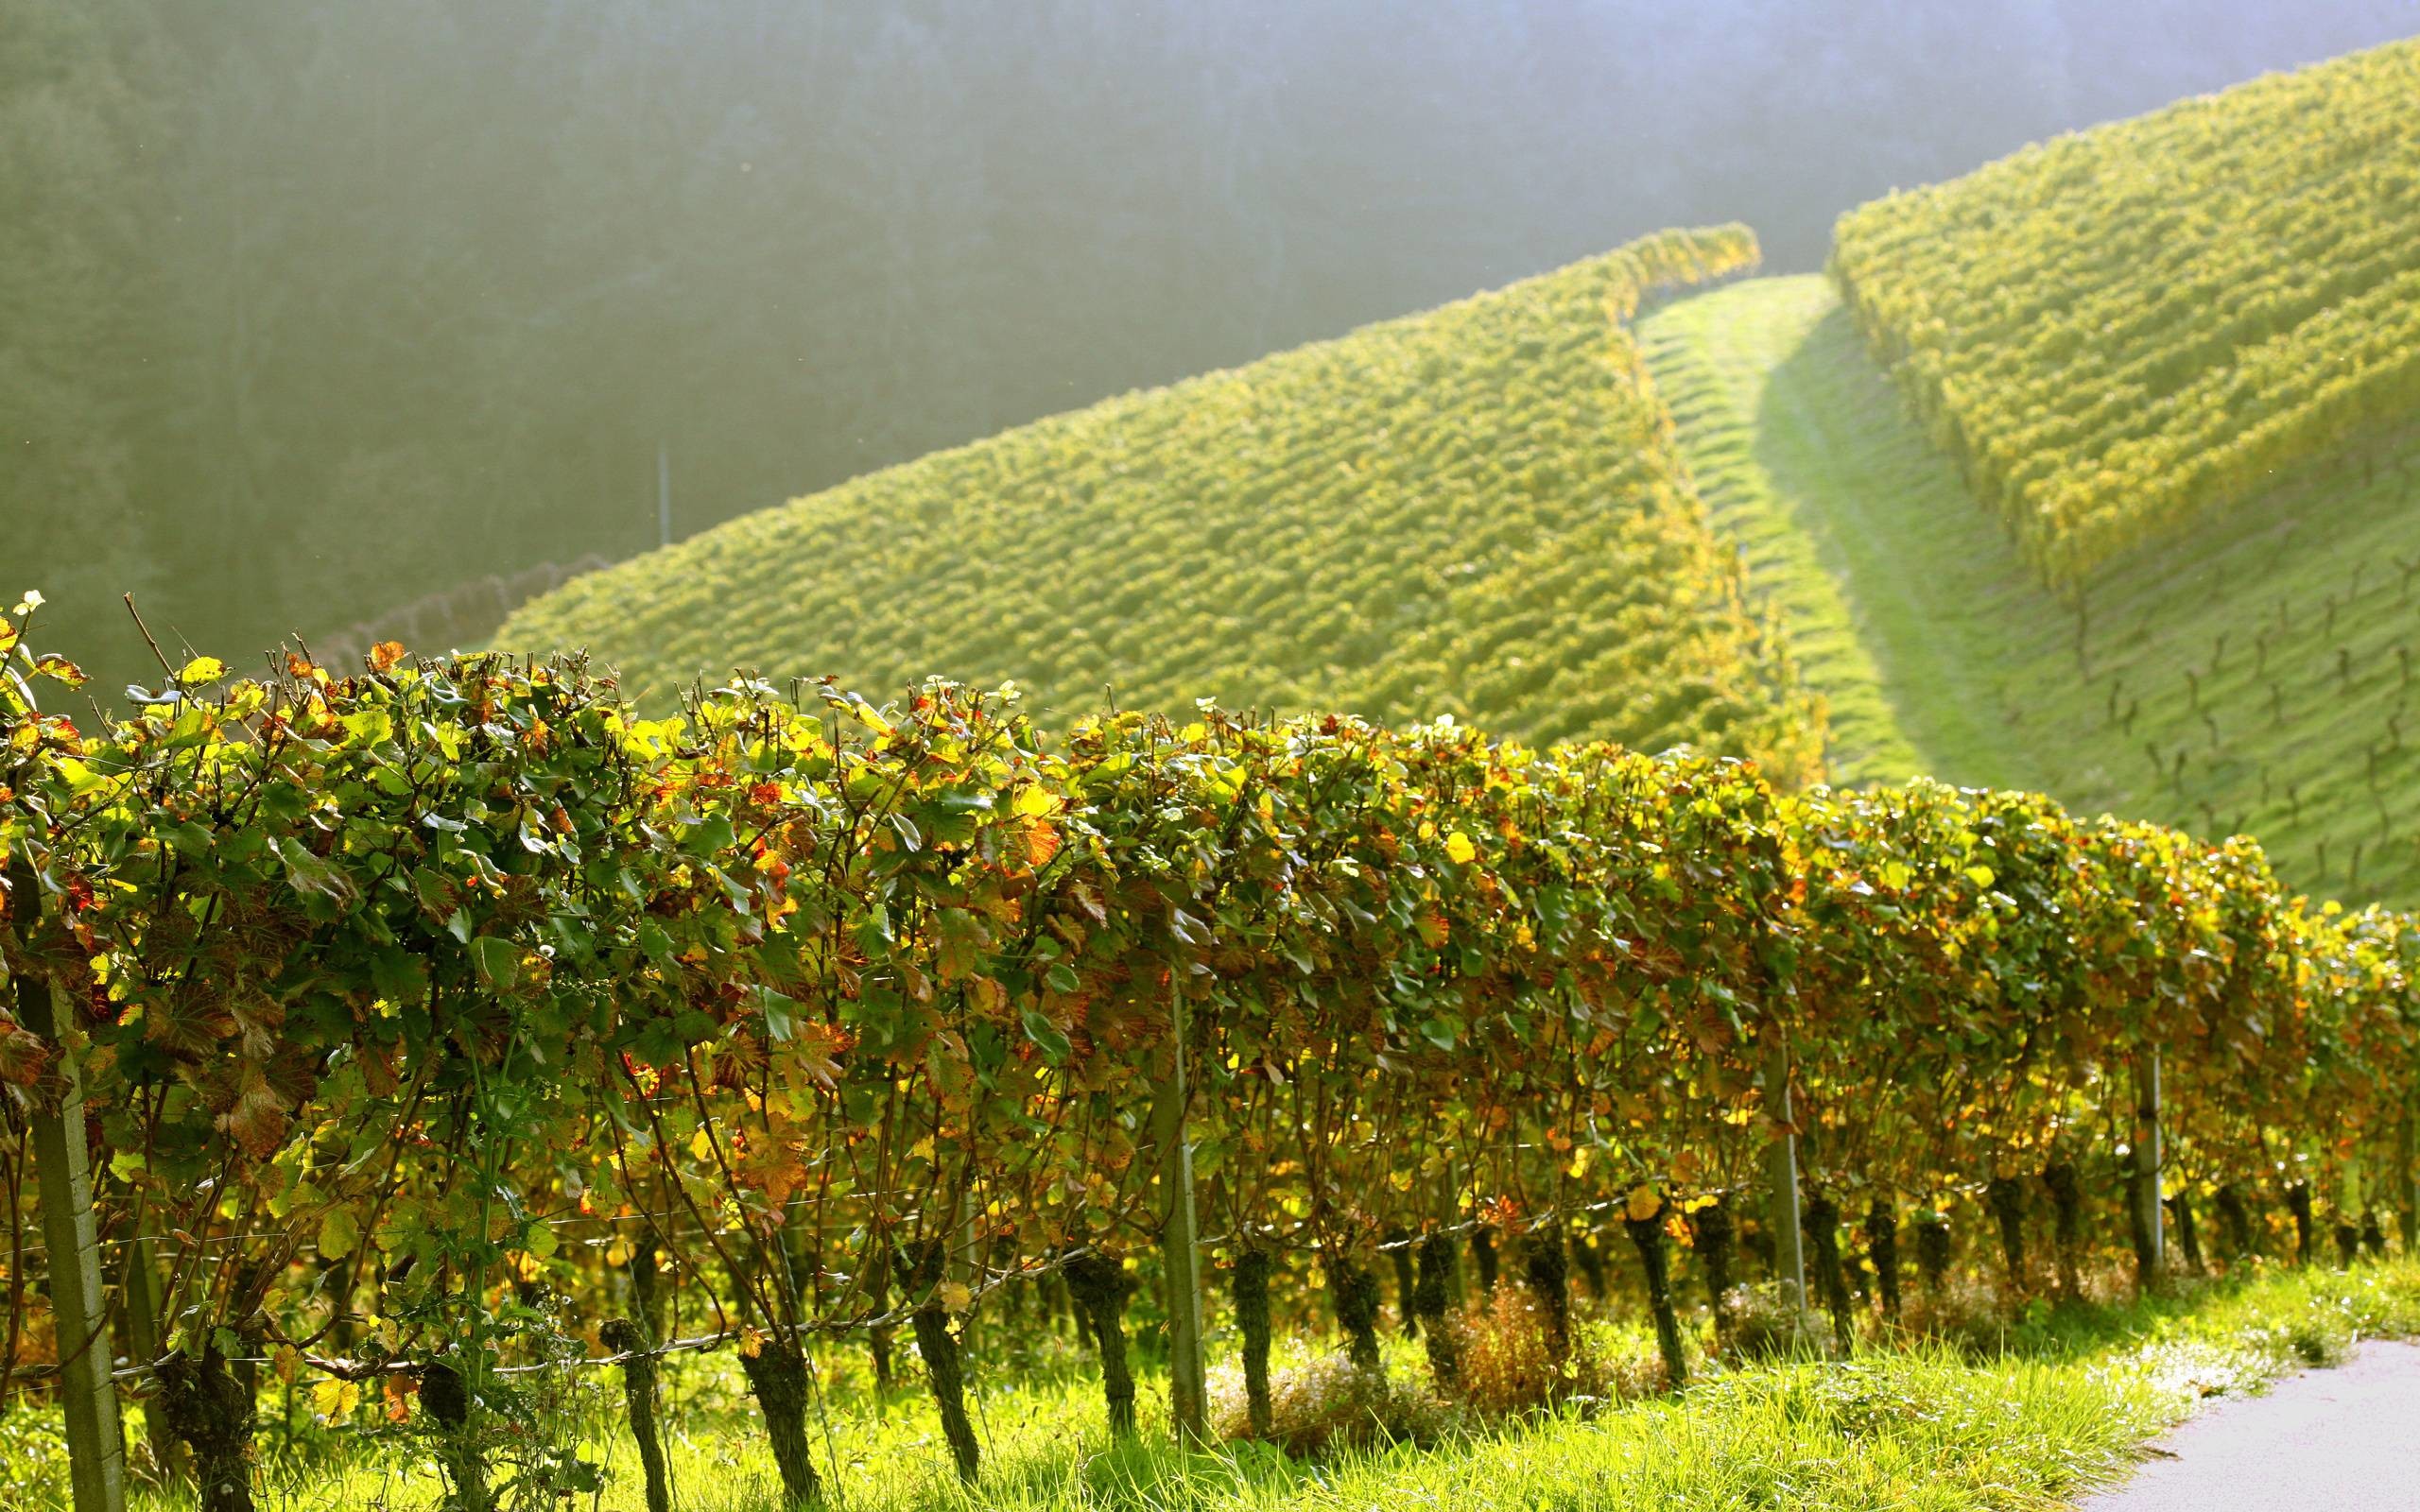 2560x1600 68 Vineyard Wallpapers | Vineyard Backgrounds Page 2